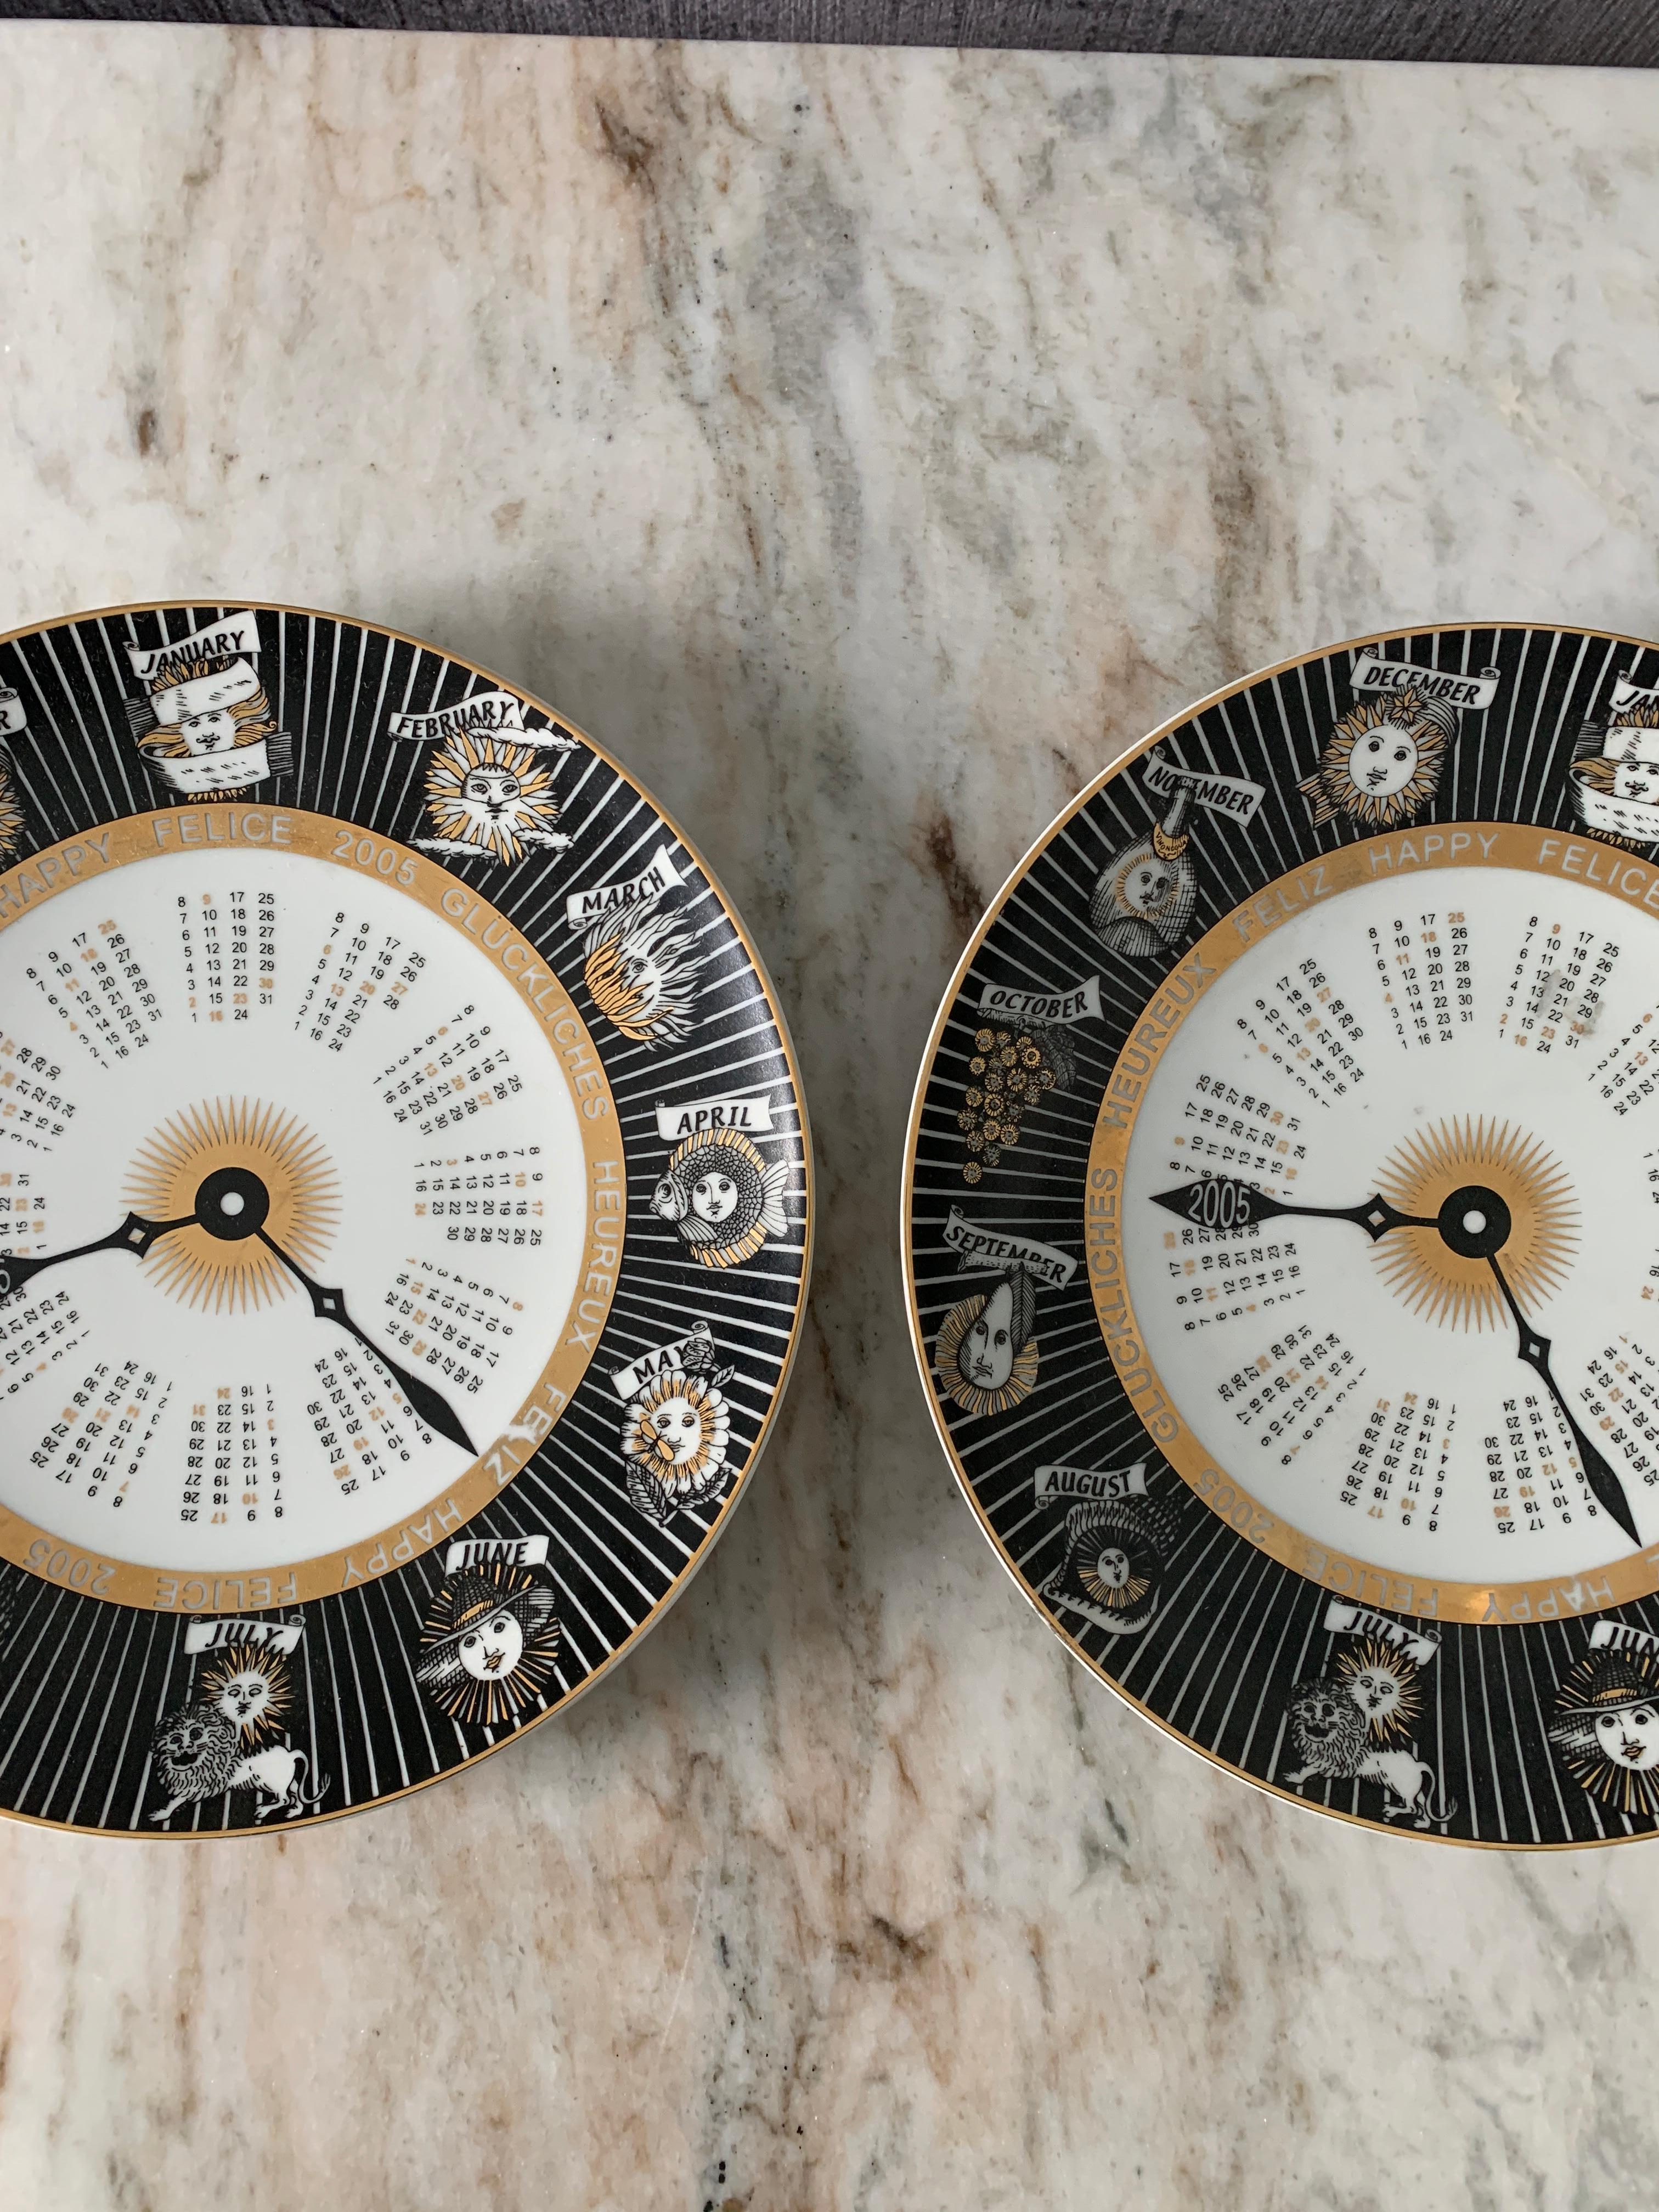 Italian 2 Plato Calendario Porcelain Plates signed and numbered Fornasetti from Italy For Sale